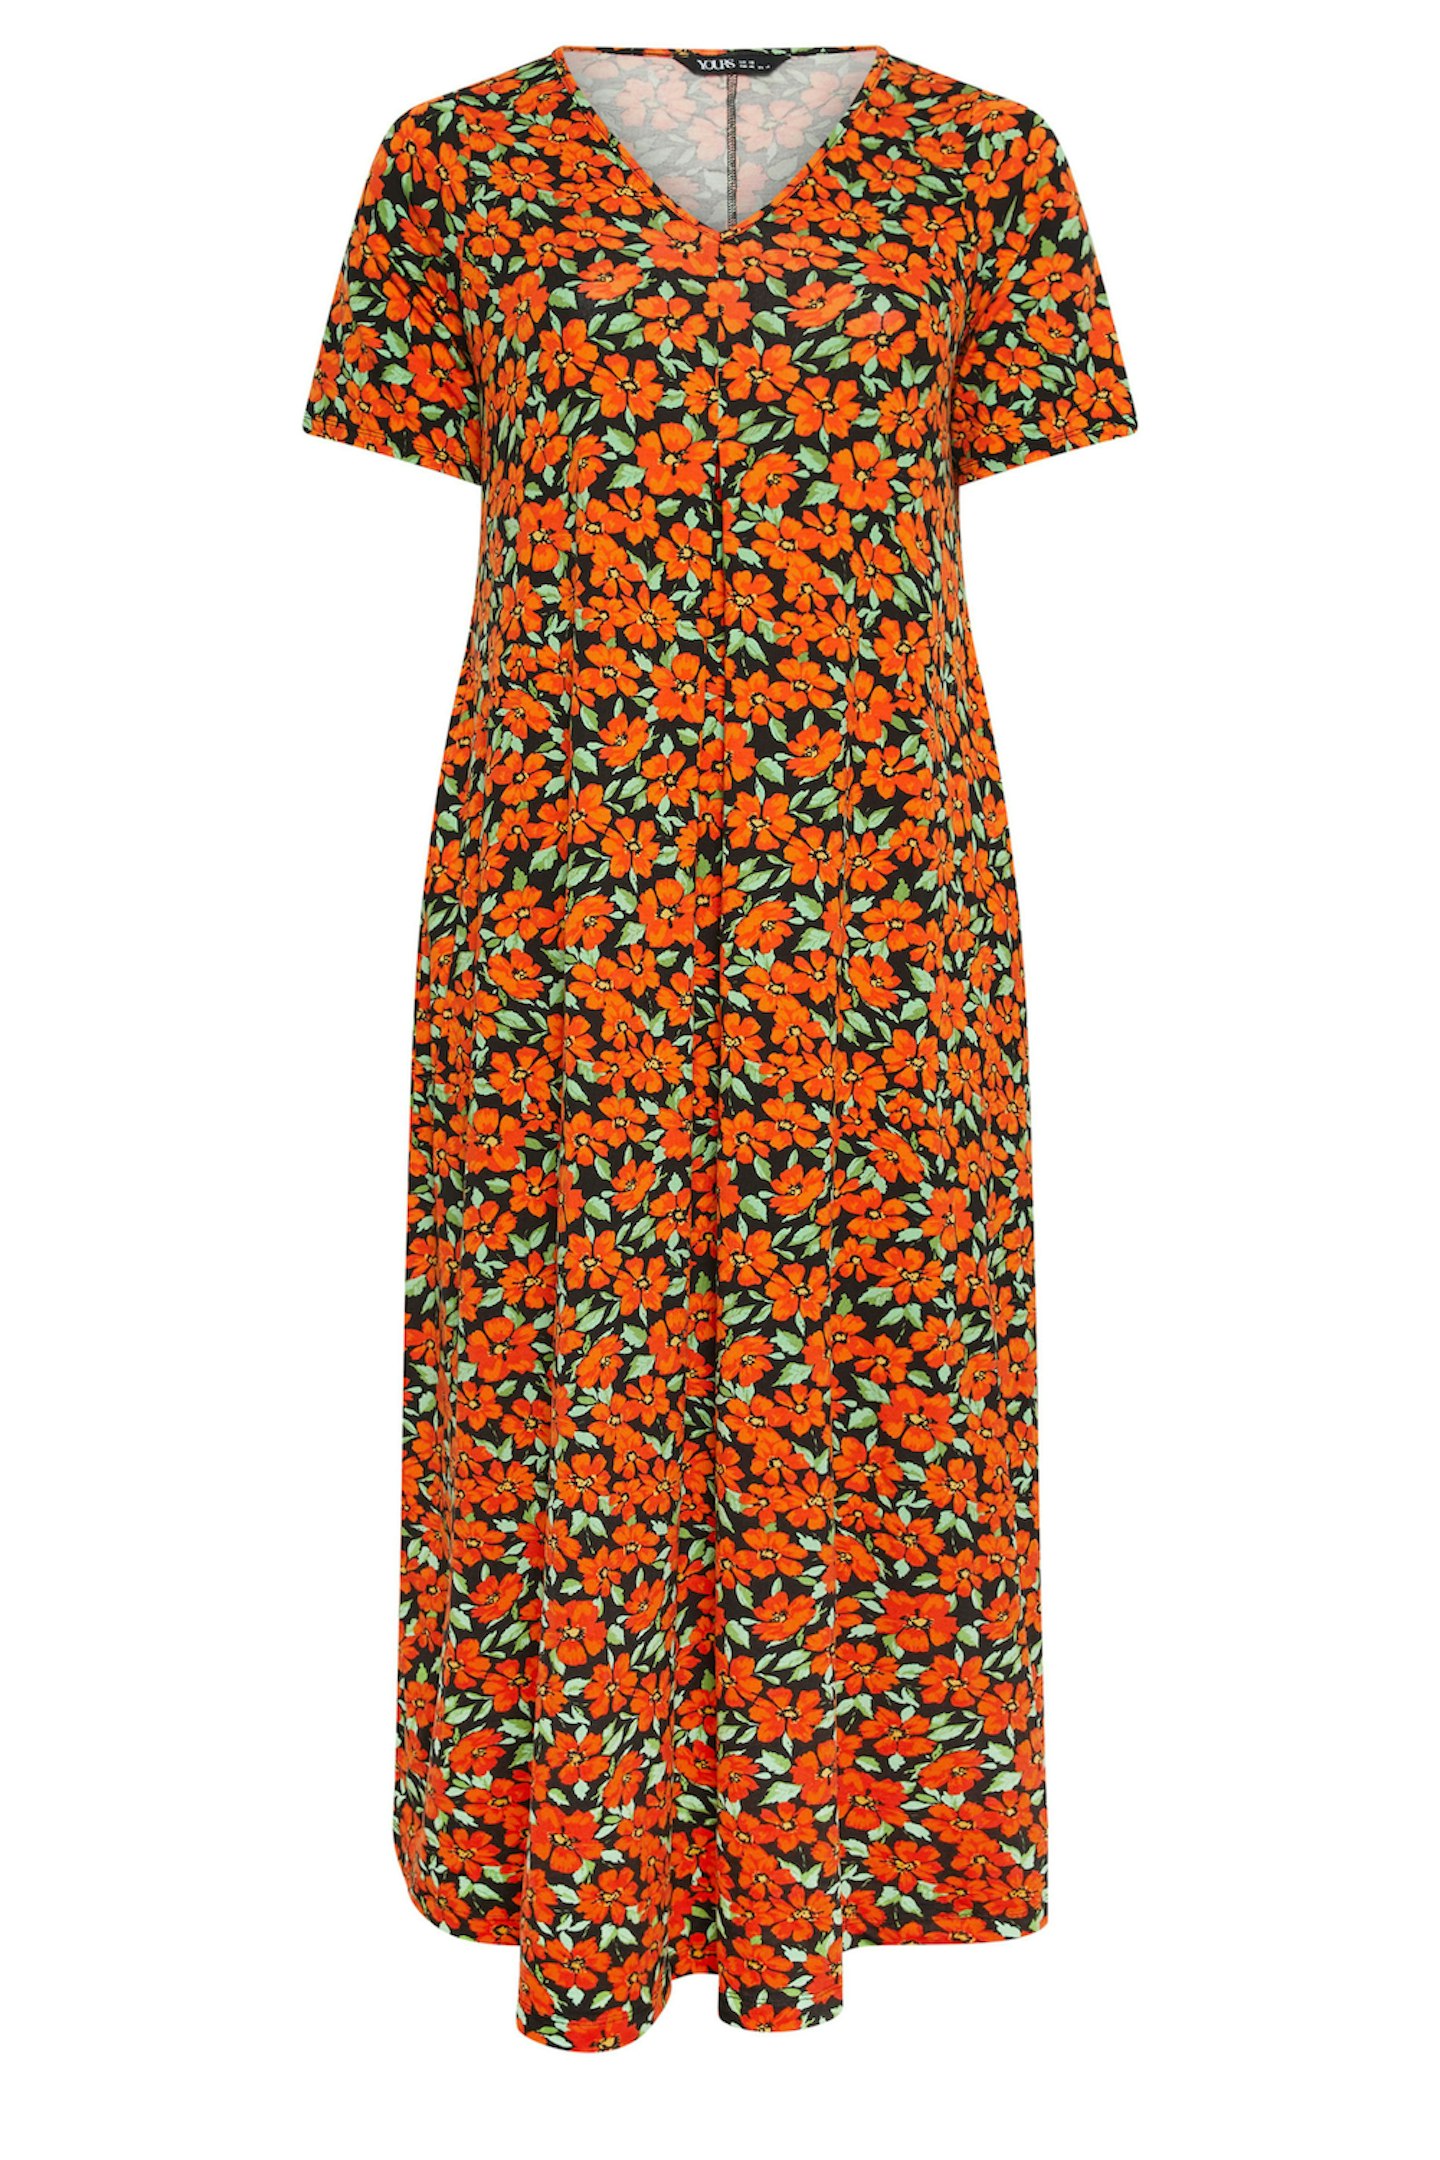 Yours Curve Orange Floral Print Pleated Front Maxi Dress